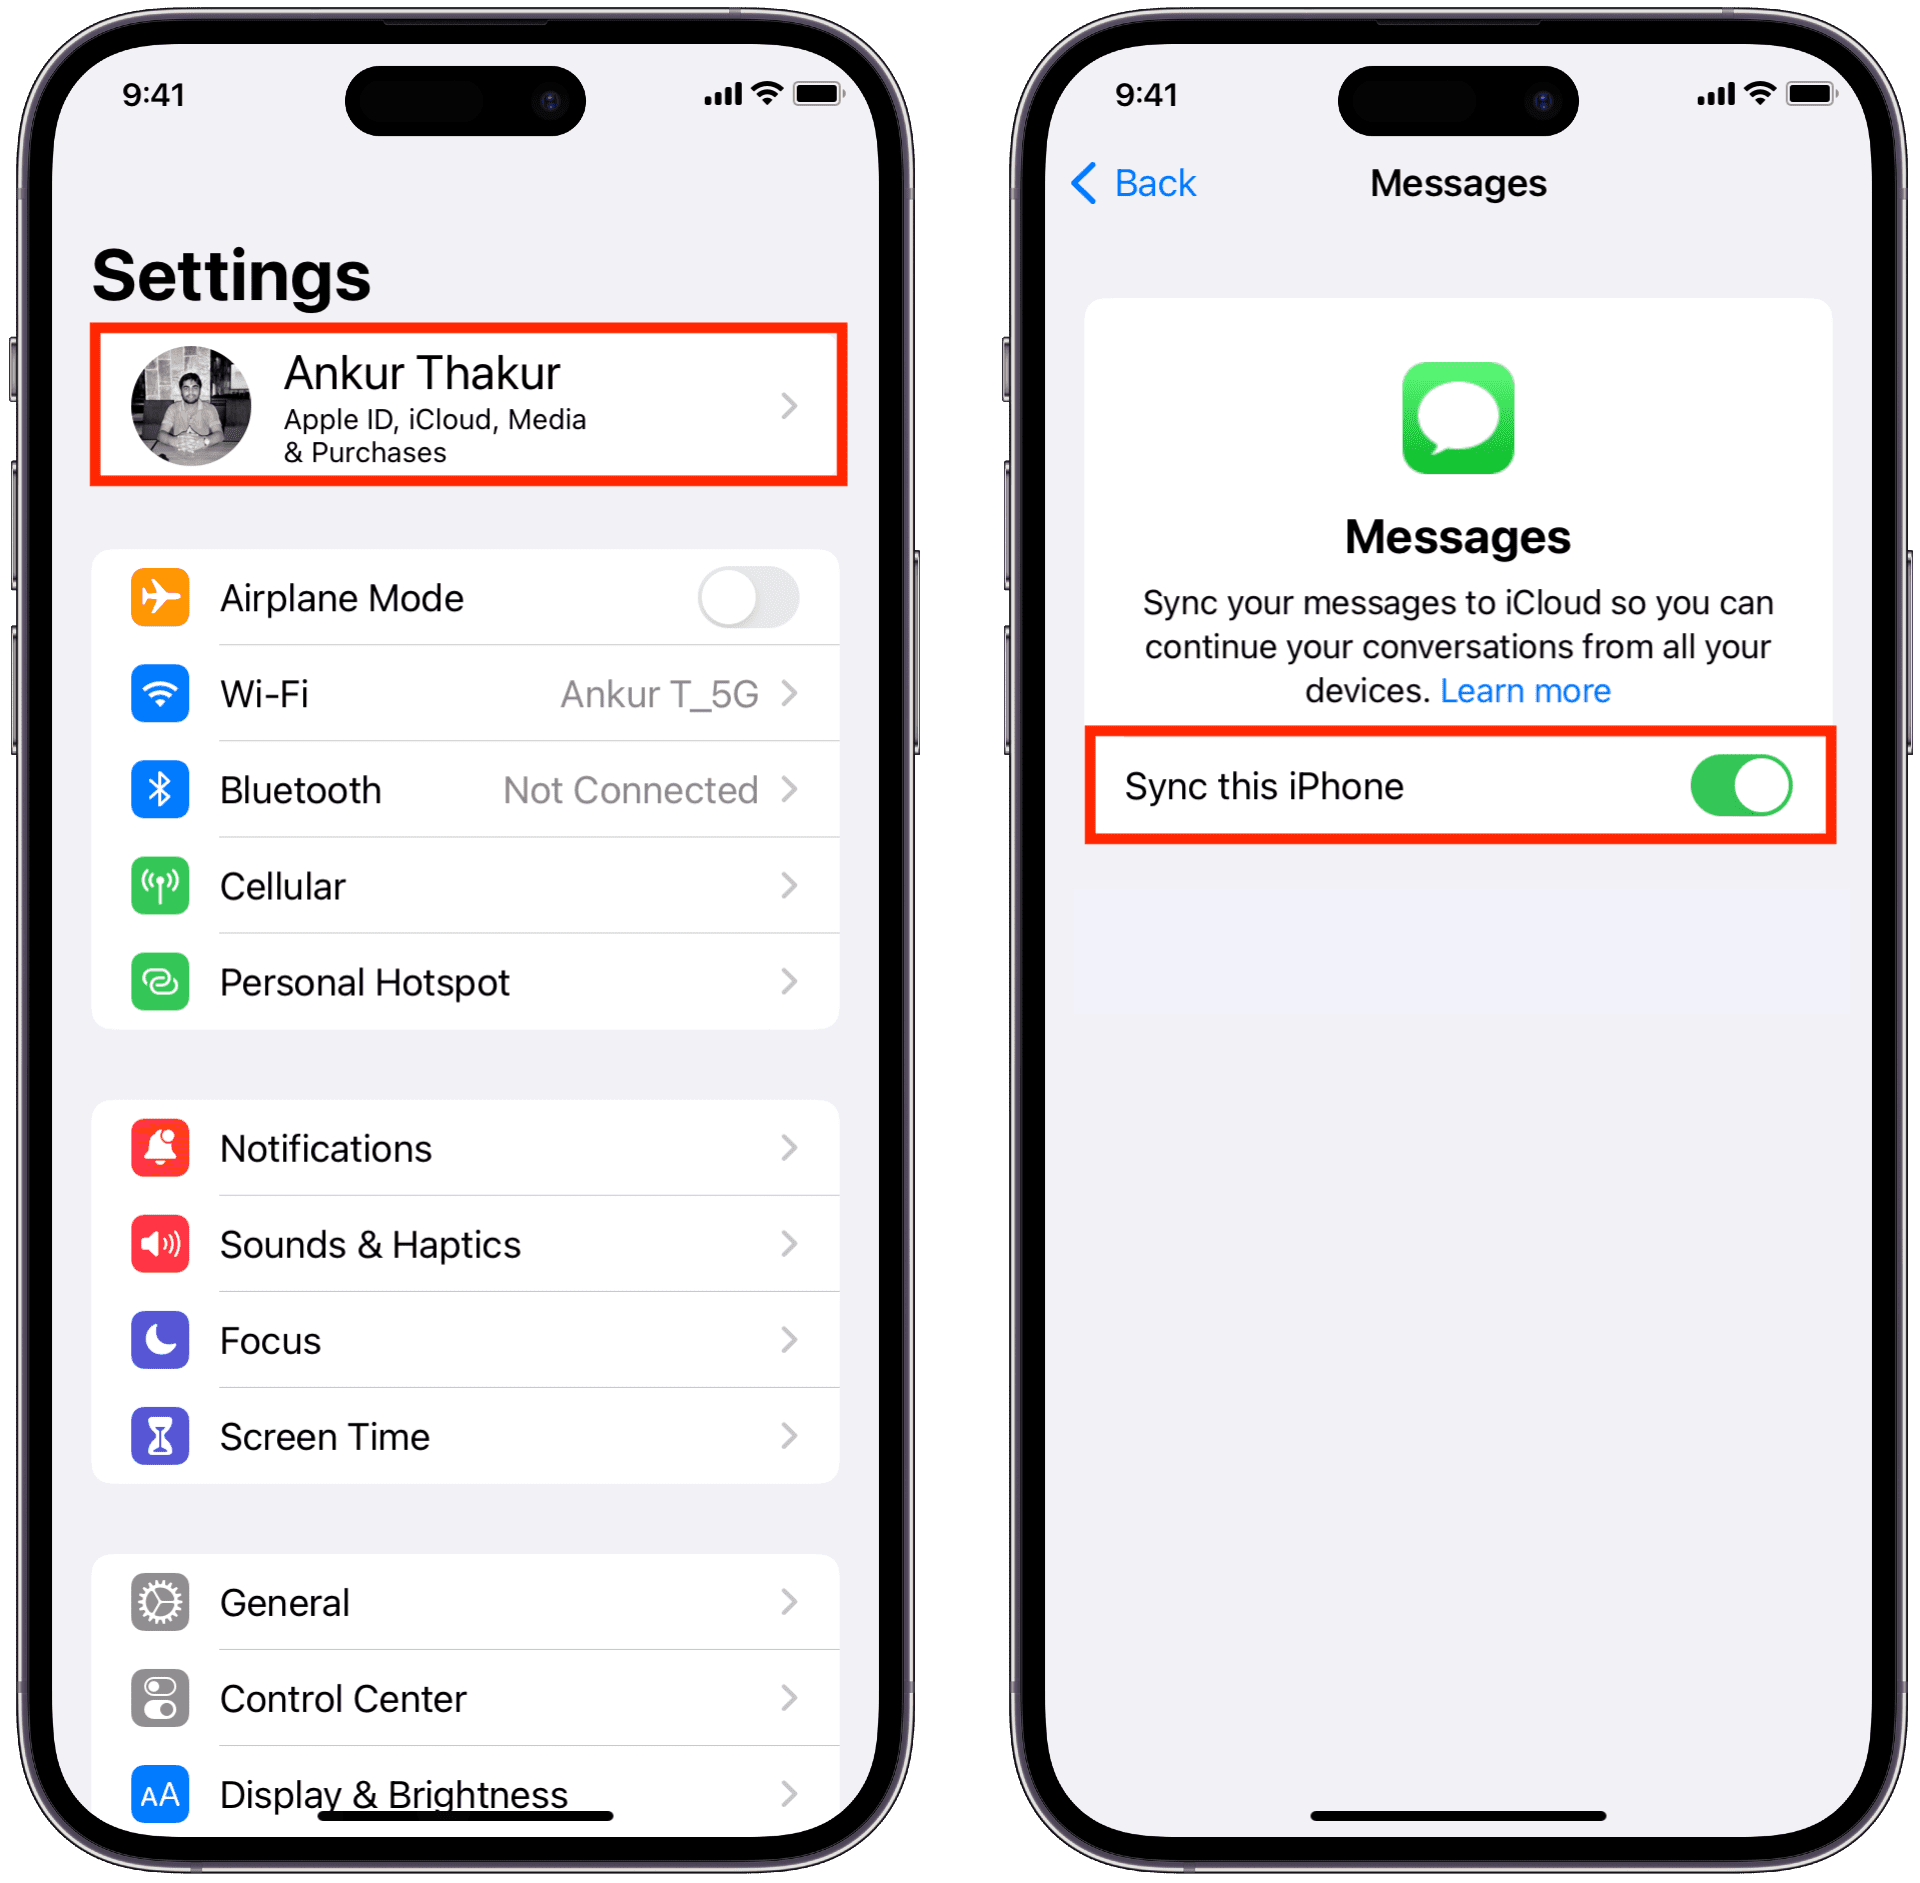 Enable messages sync on your new iPhone